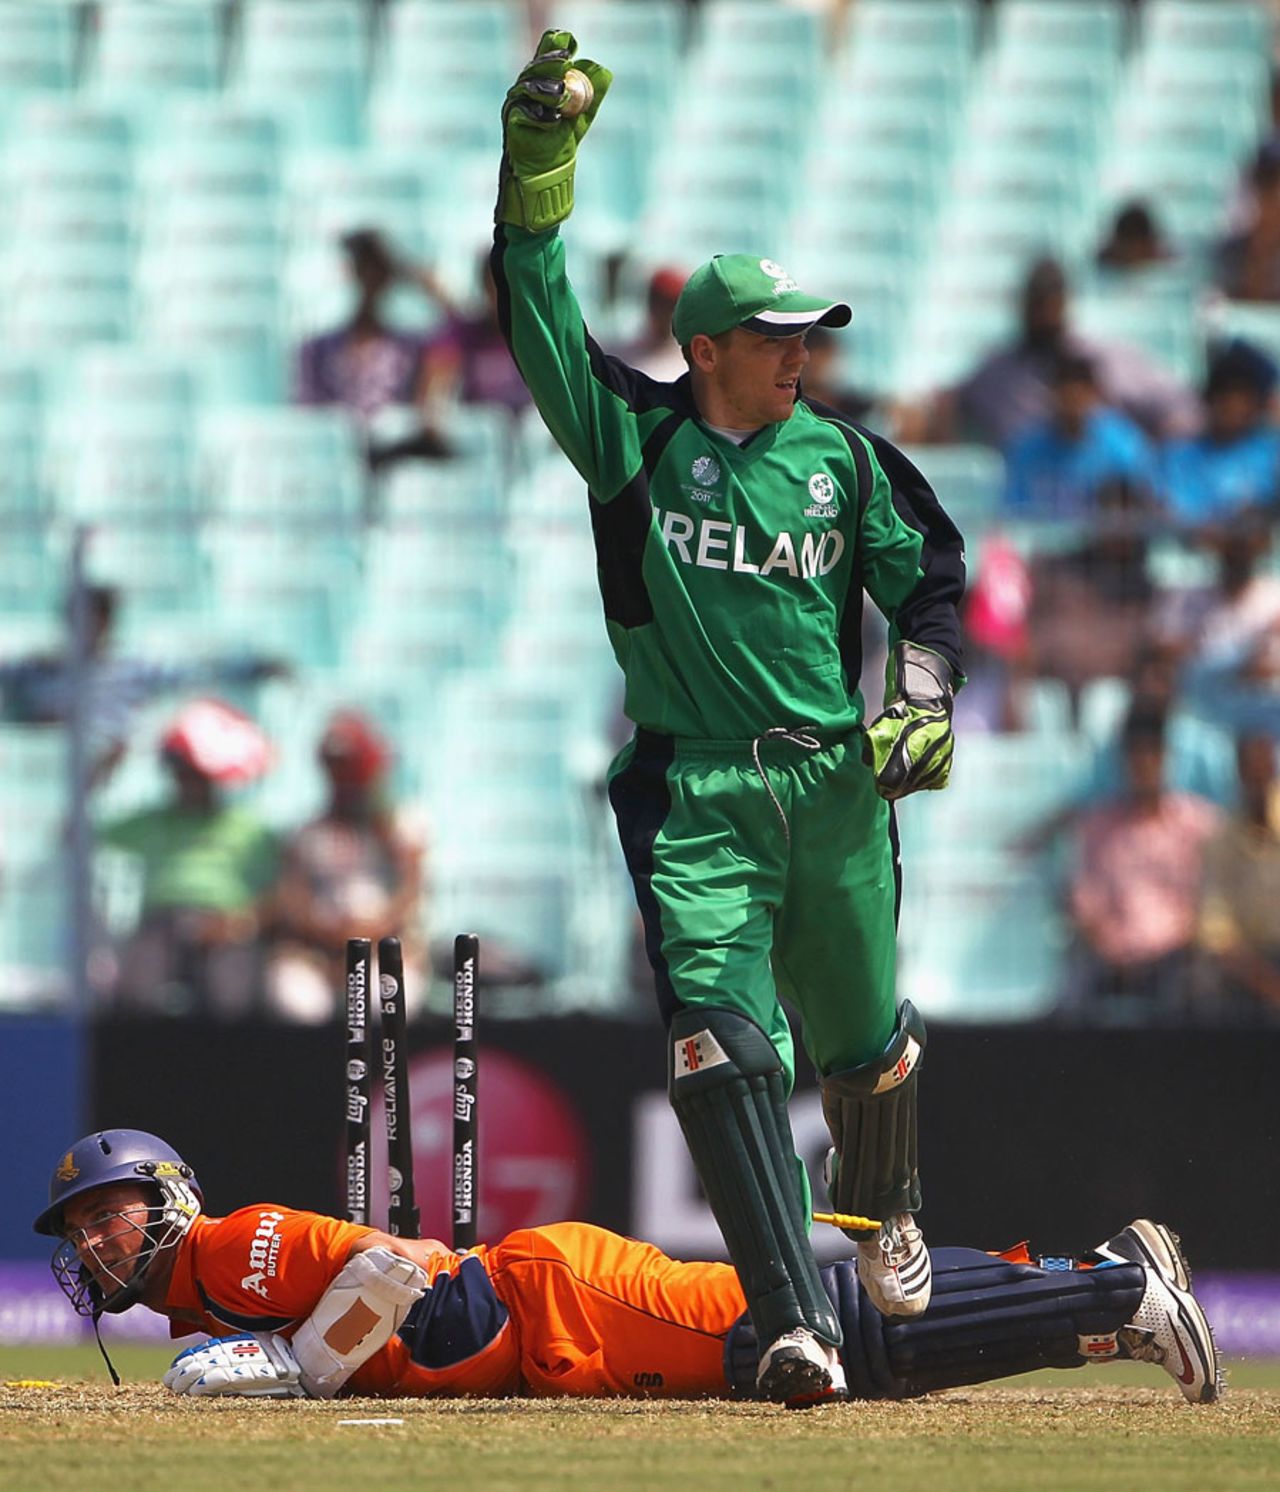 Atse Buurman is run out for 26, Ireland v Netherlands, World Cup 2011, Group B, March 18, 2011